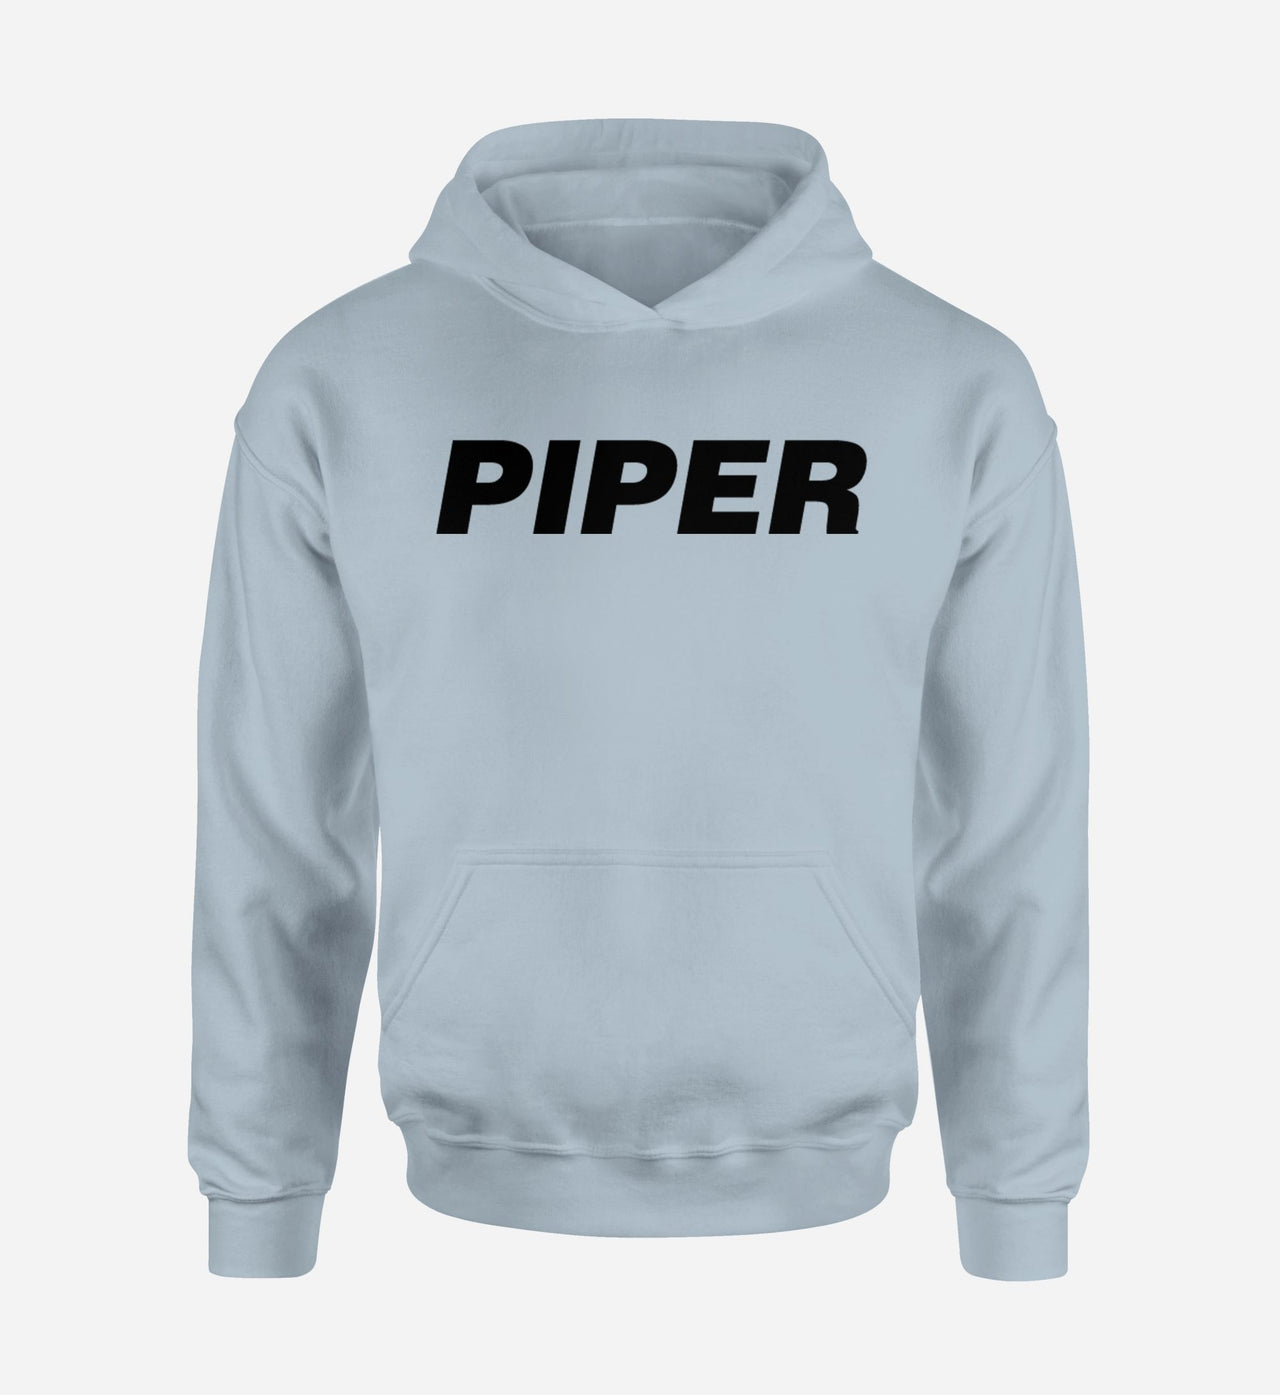 Piper & Text Designed Hoodies